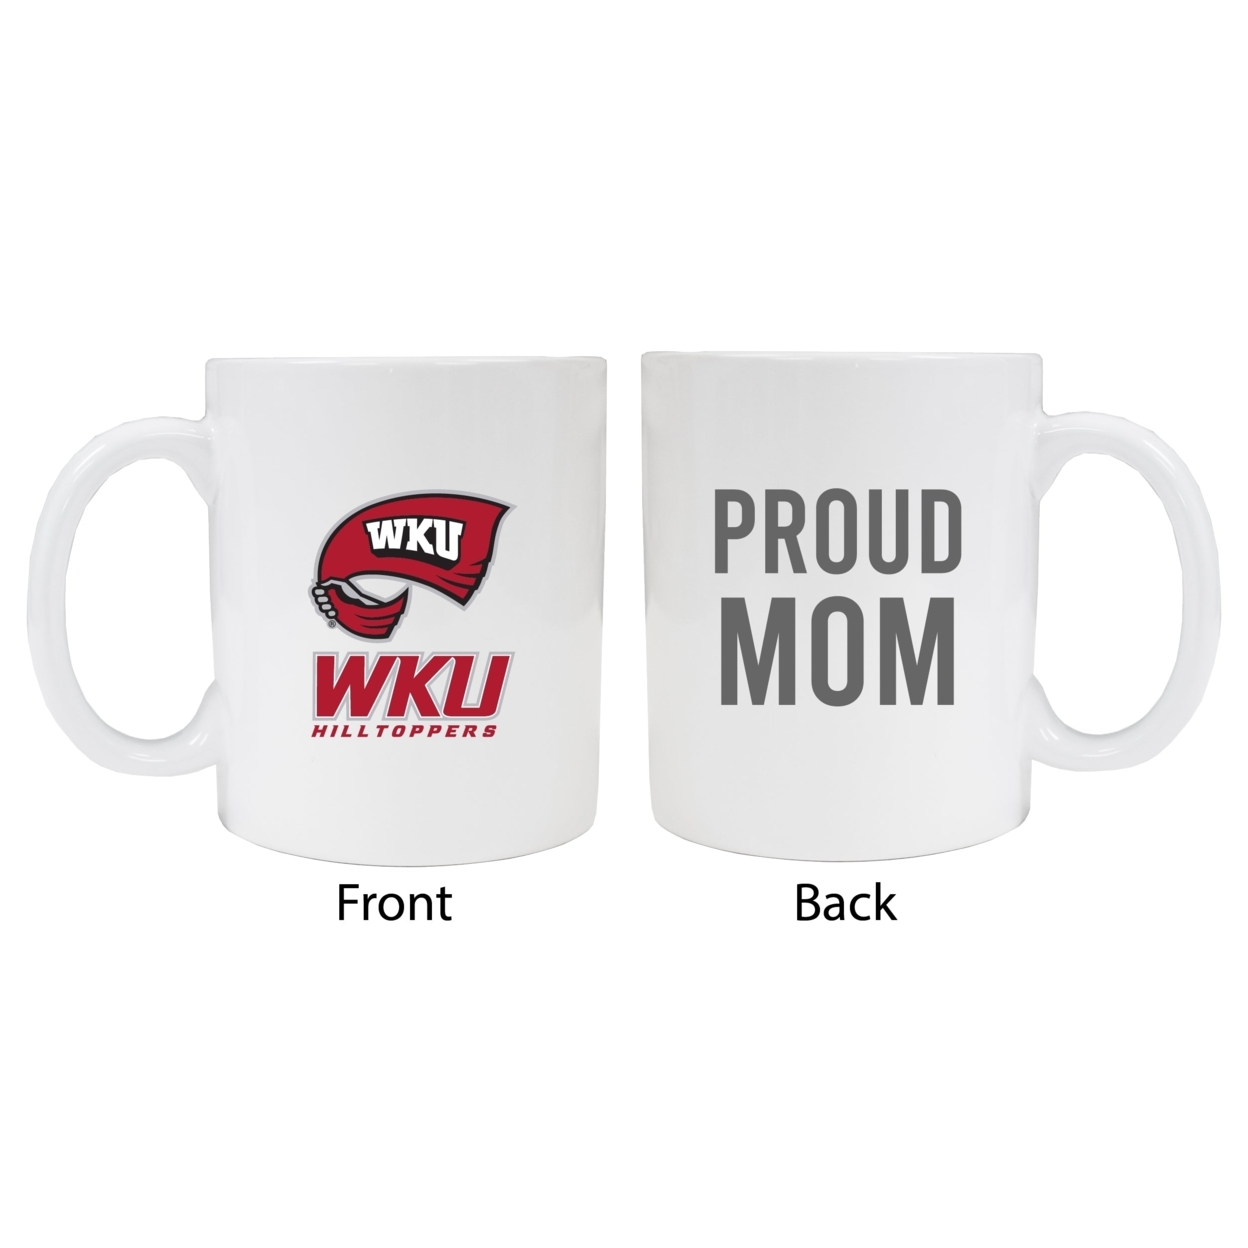 Western Kentucky Hilltoppers Proud Mom Ceramic Coffee Mug - White (2 Pack)